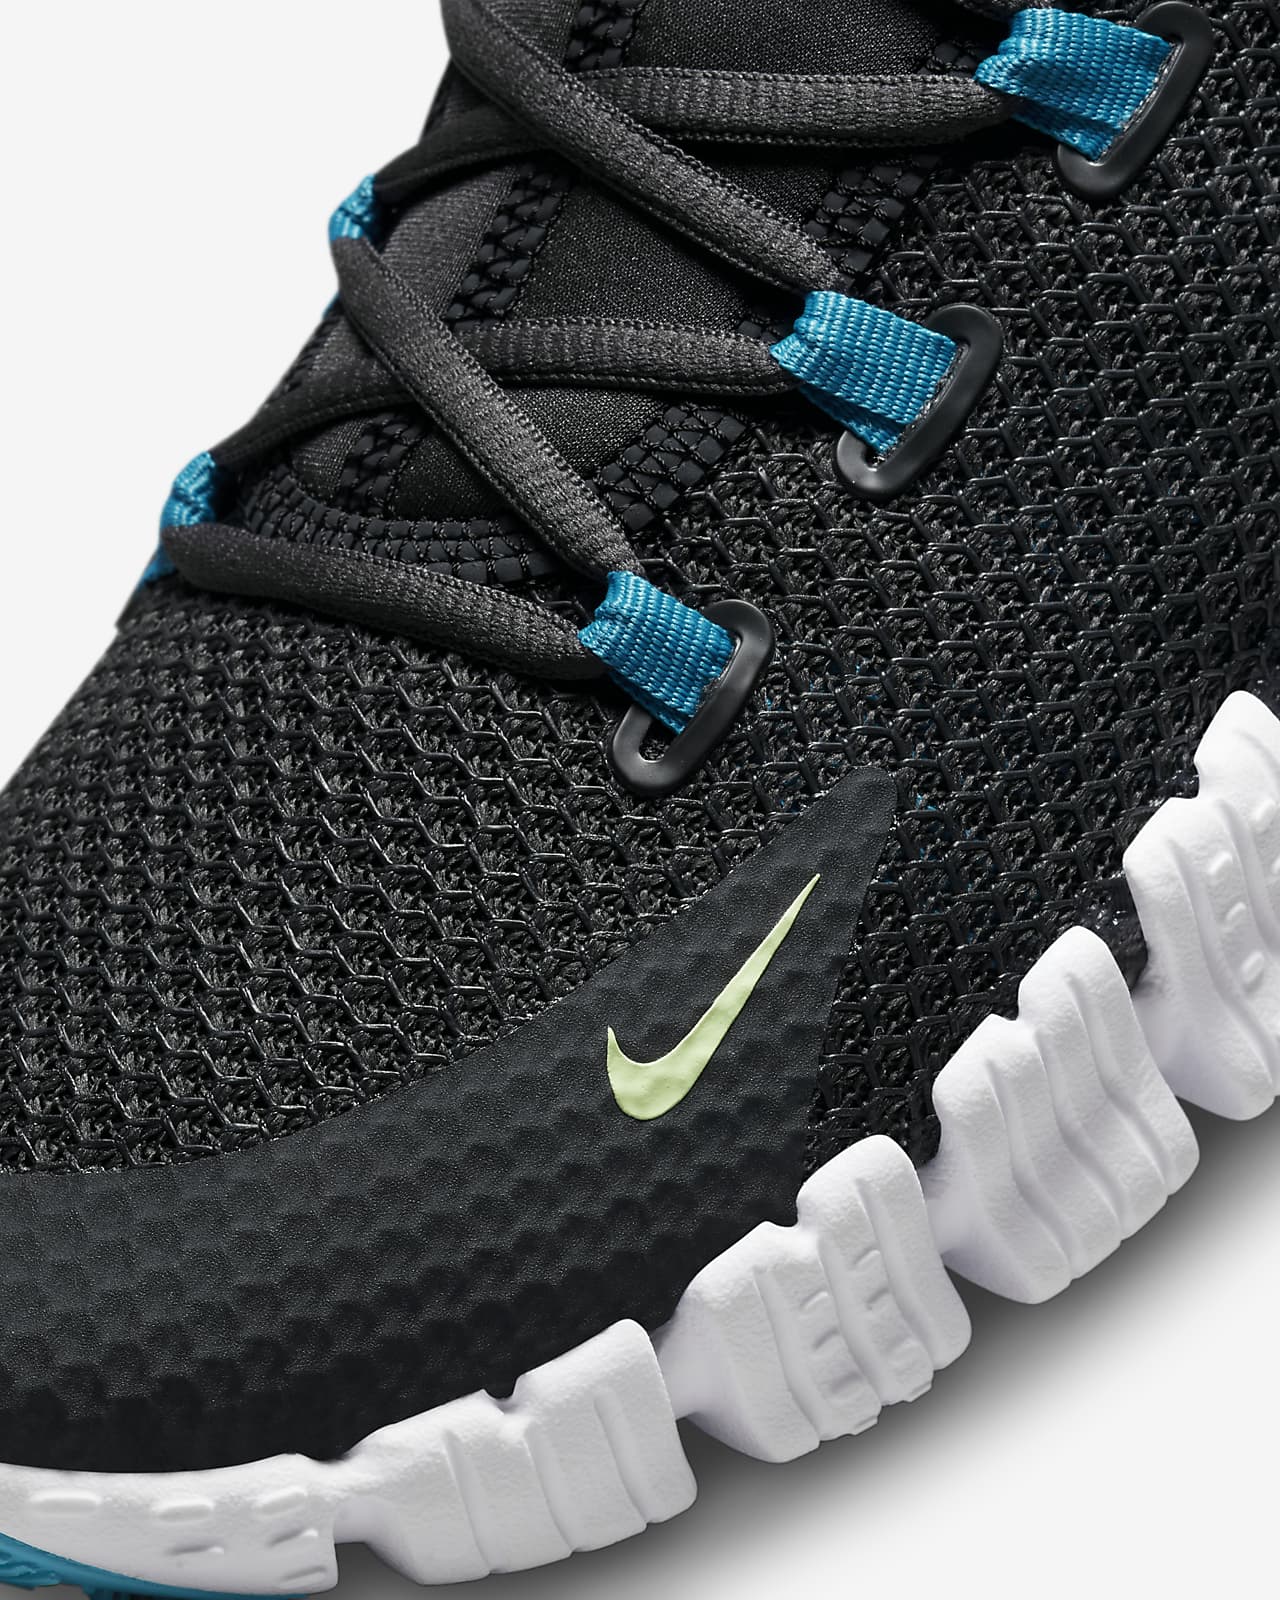 Nike Metcon 4 Workout Shoes. ID